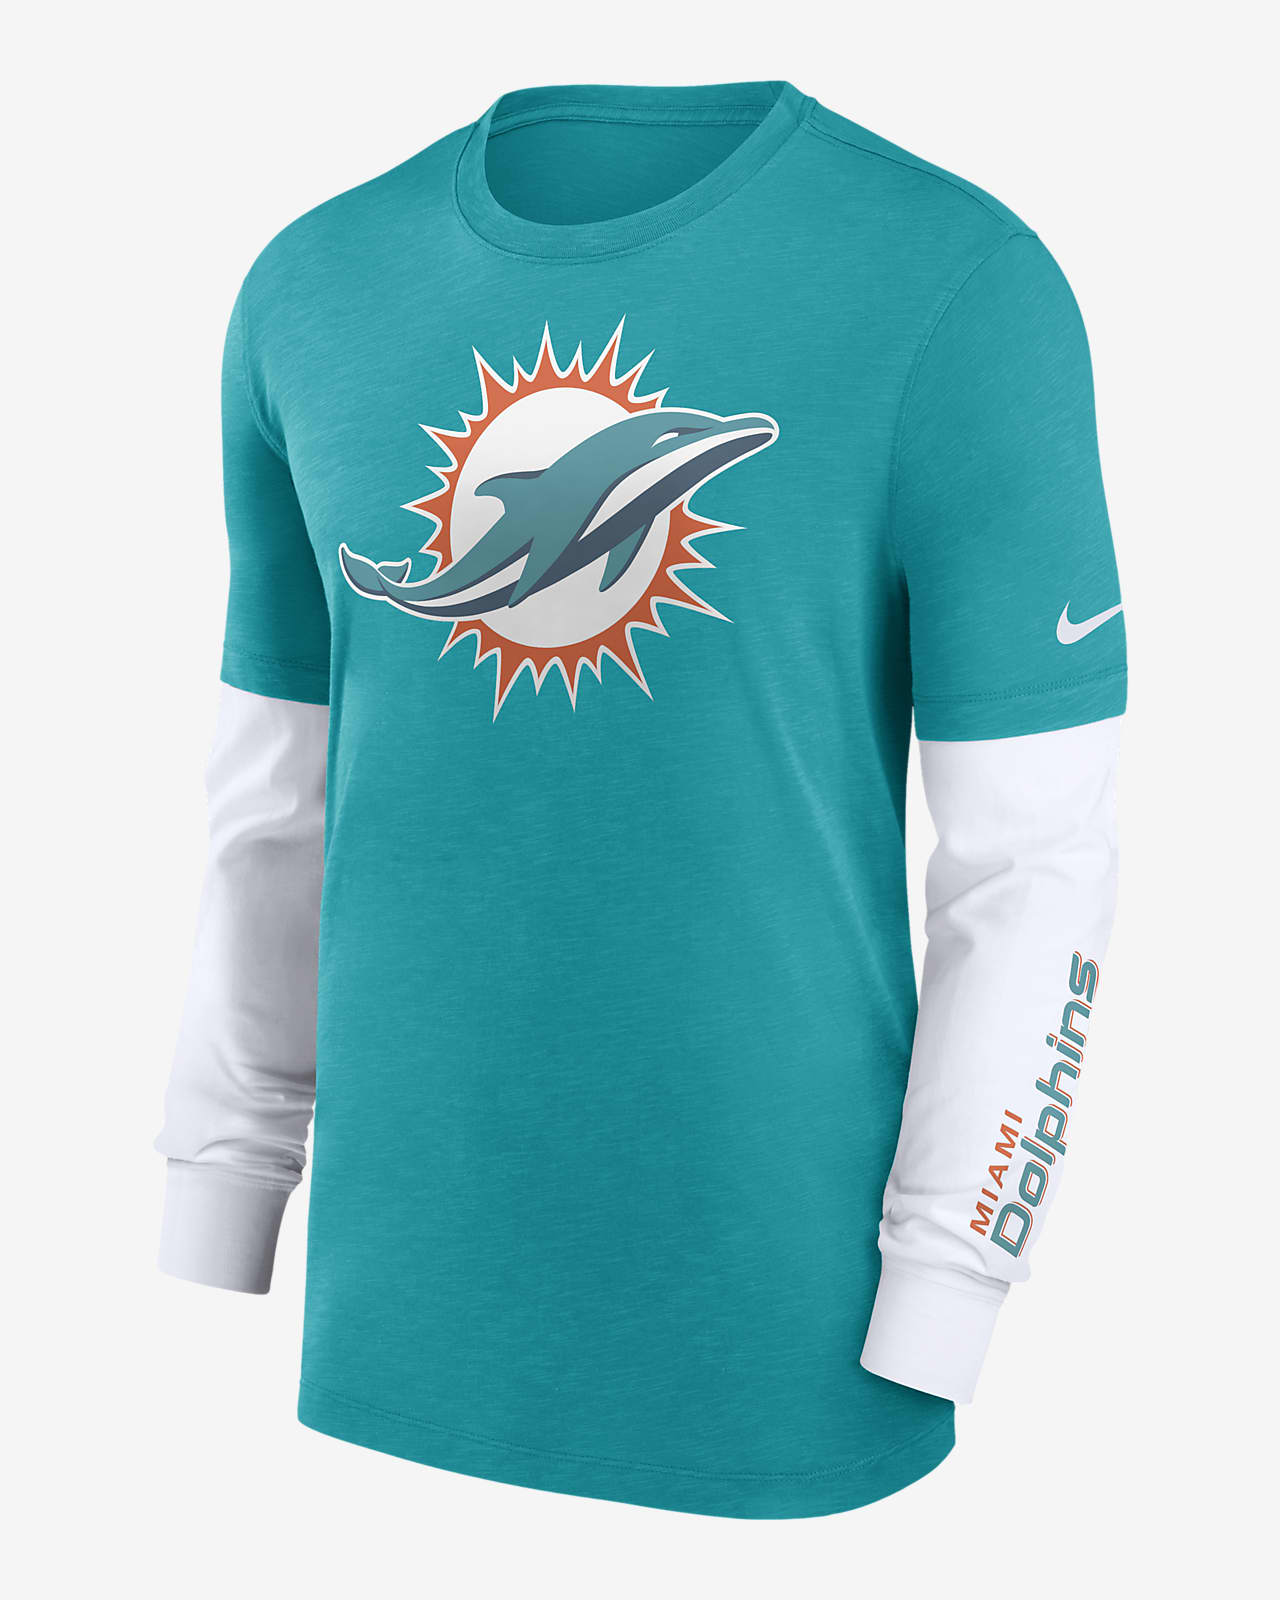 Miami Dolphins Nike Men's NFL Long-Sleeve Top in Green, Size: Small | 00BY01TN9P-05G